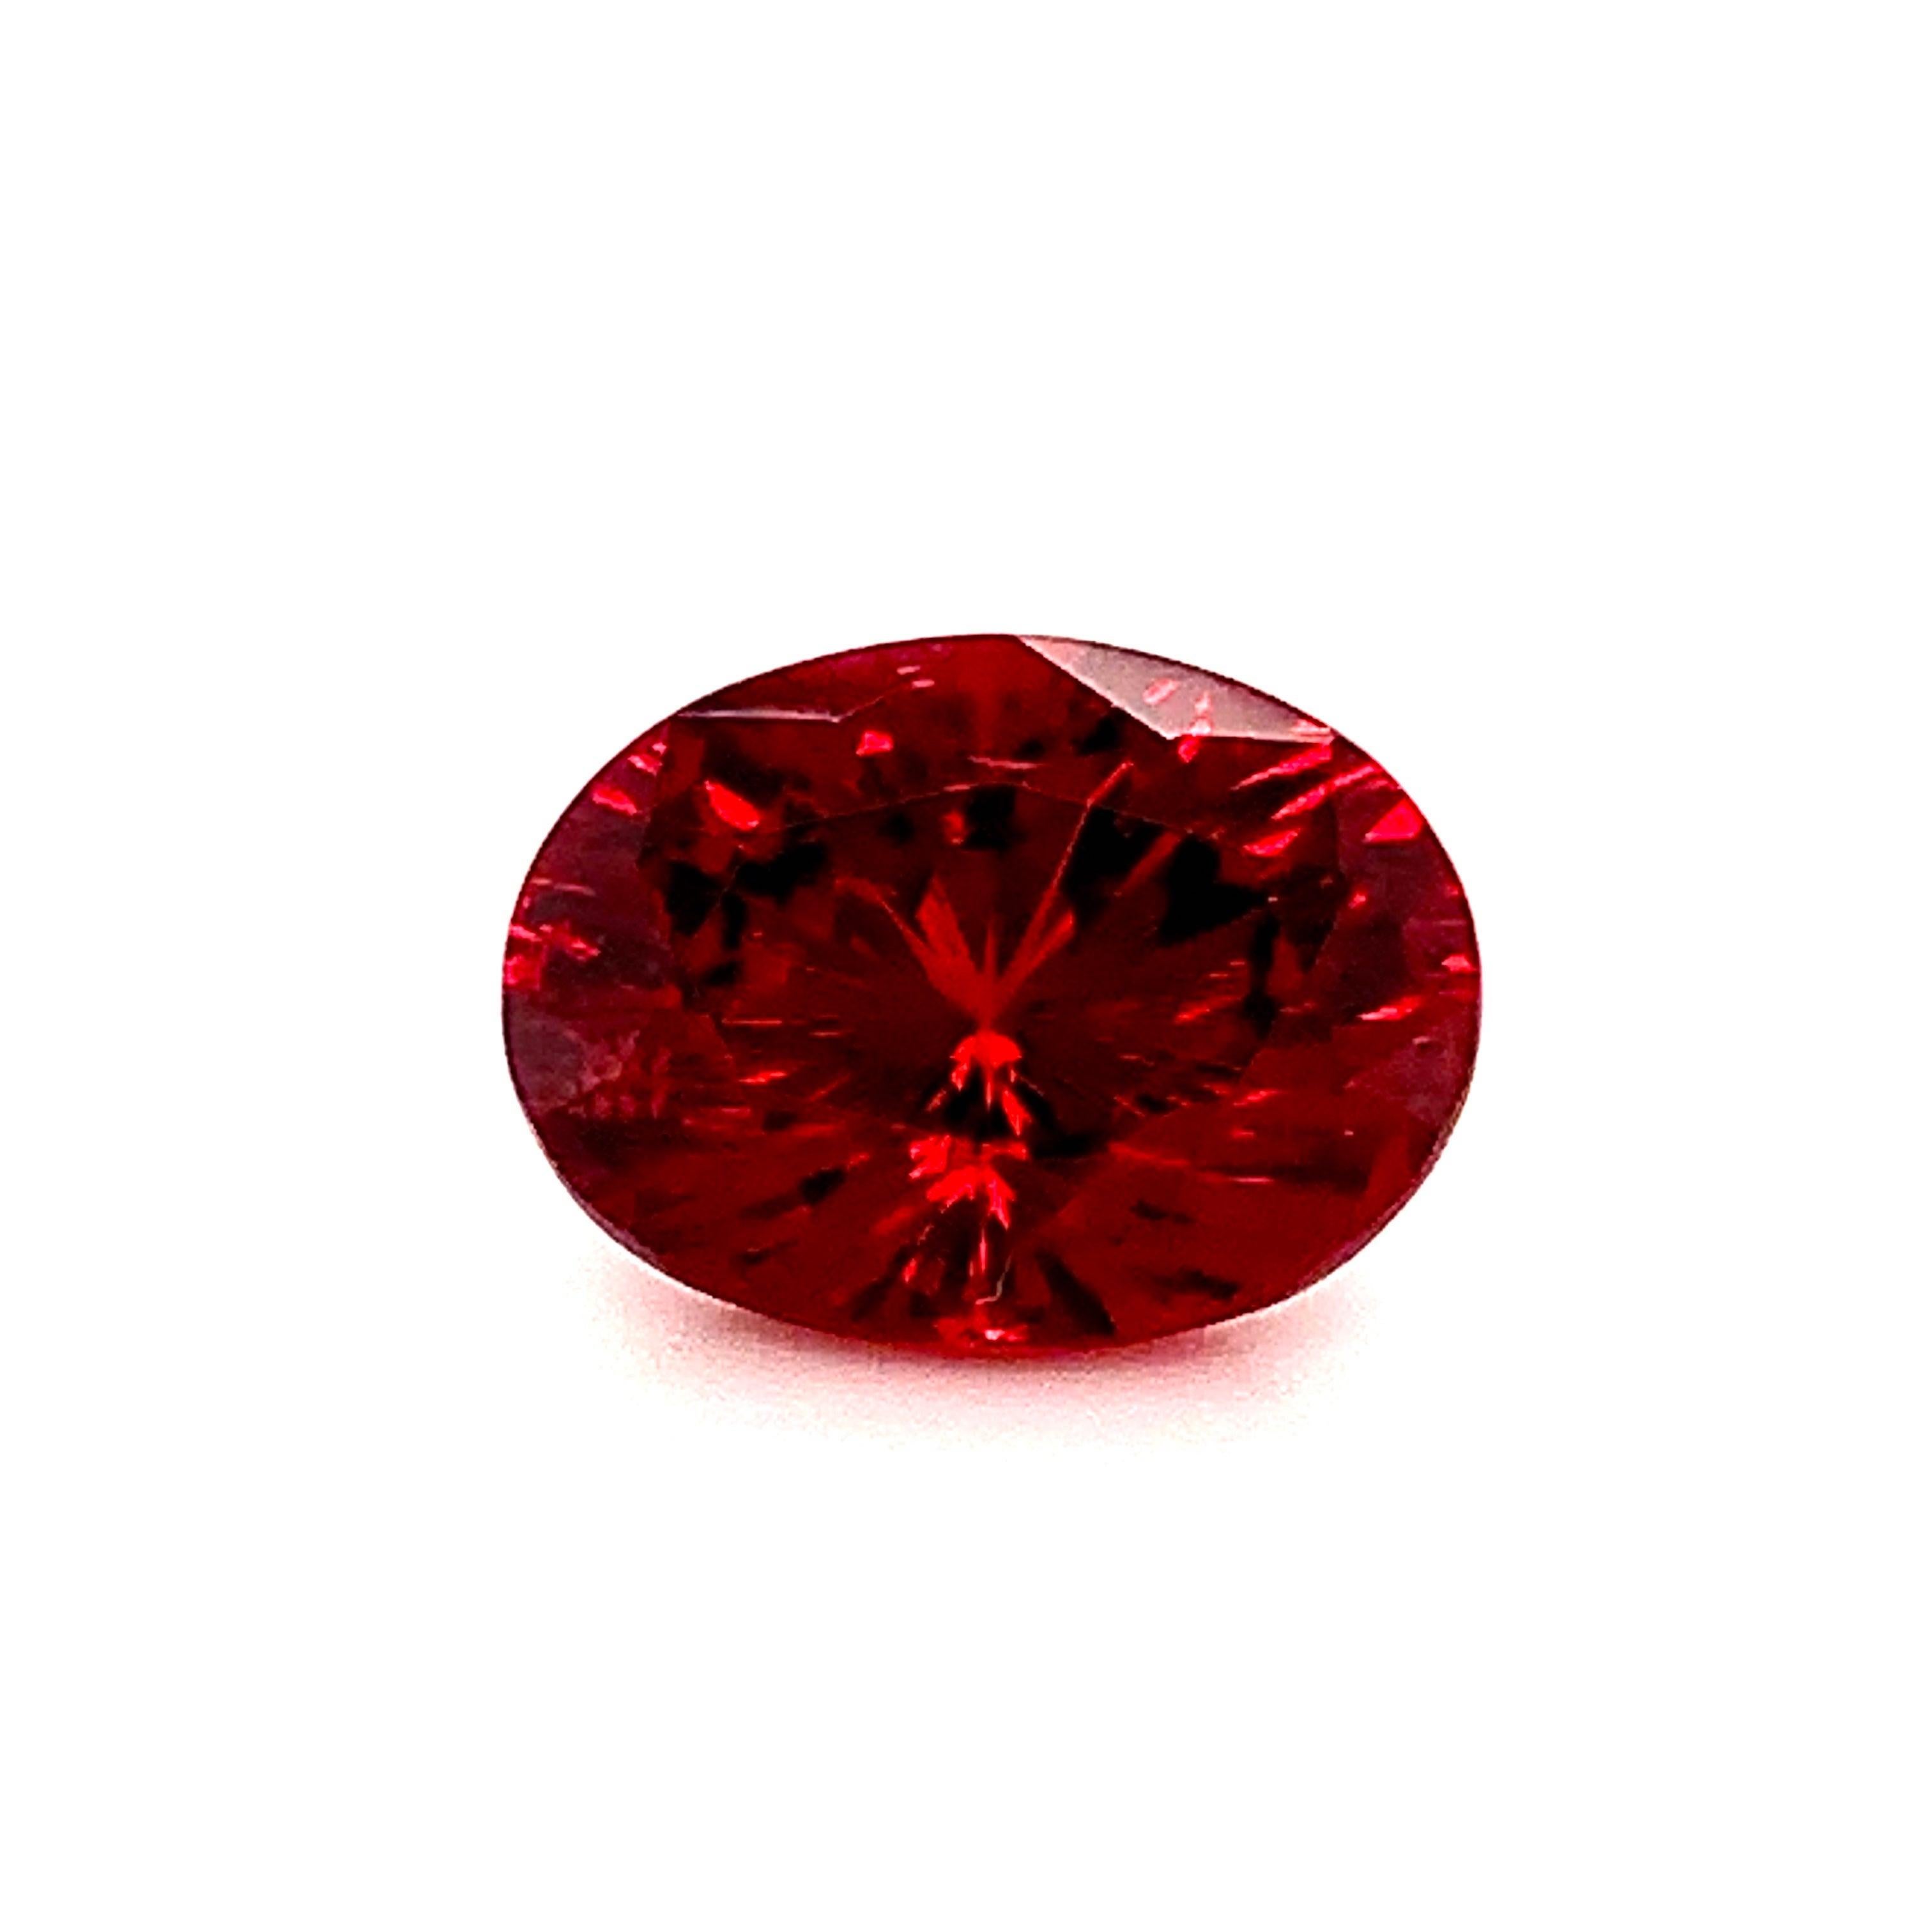 Unheated 4.84 Carat Red Spinel Oval, Unset Loose Gemstone, GIA Certified 2